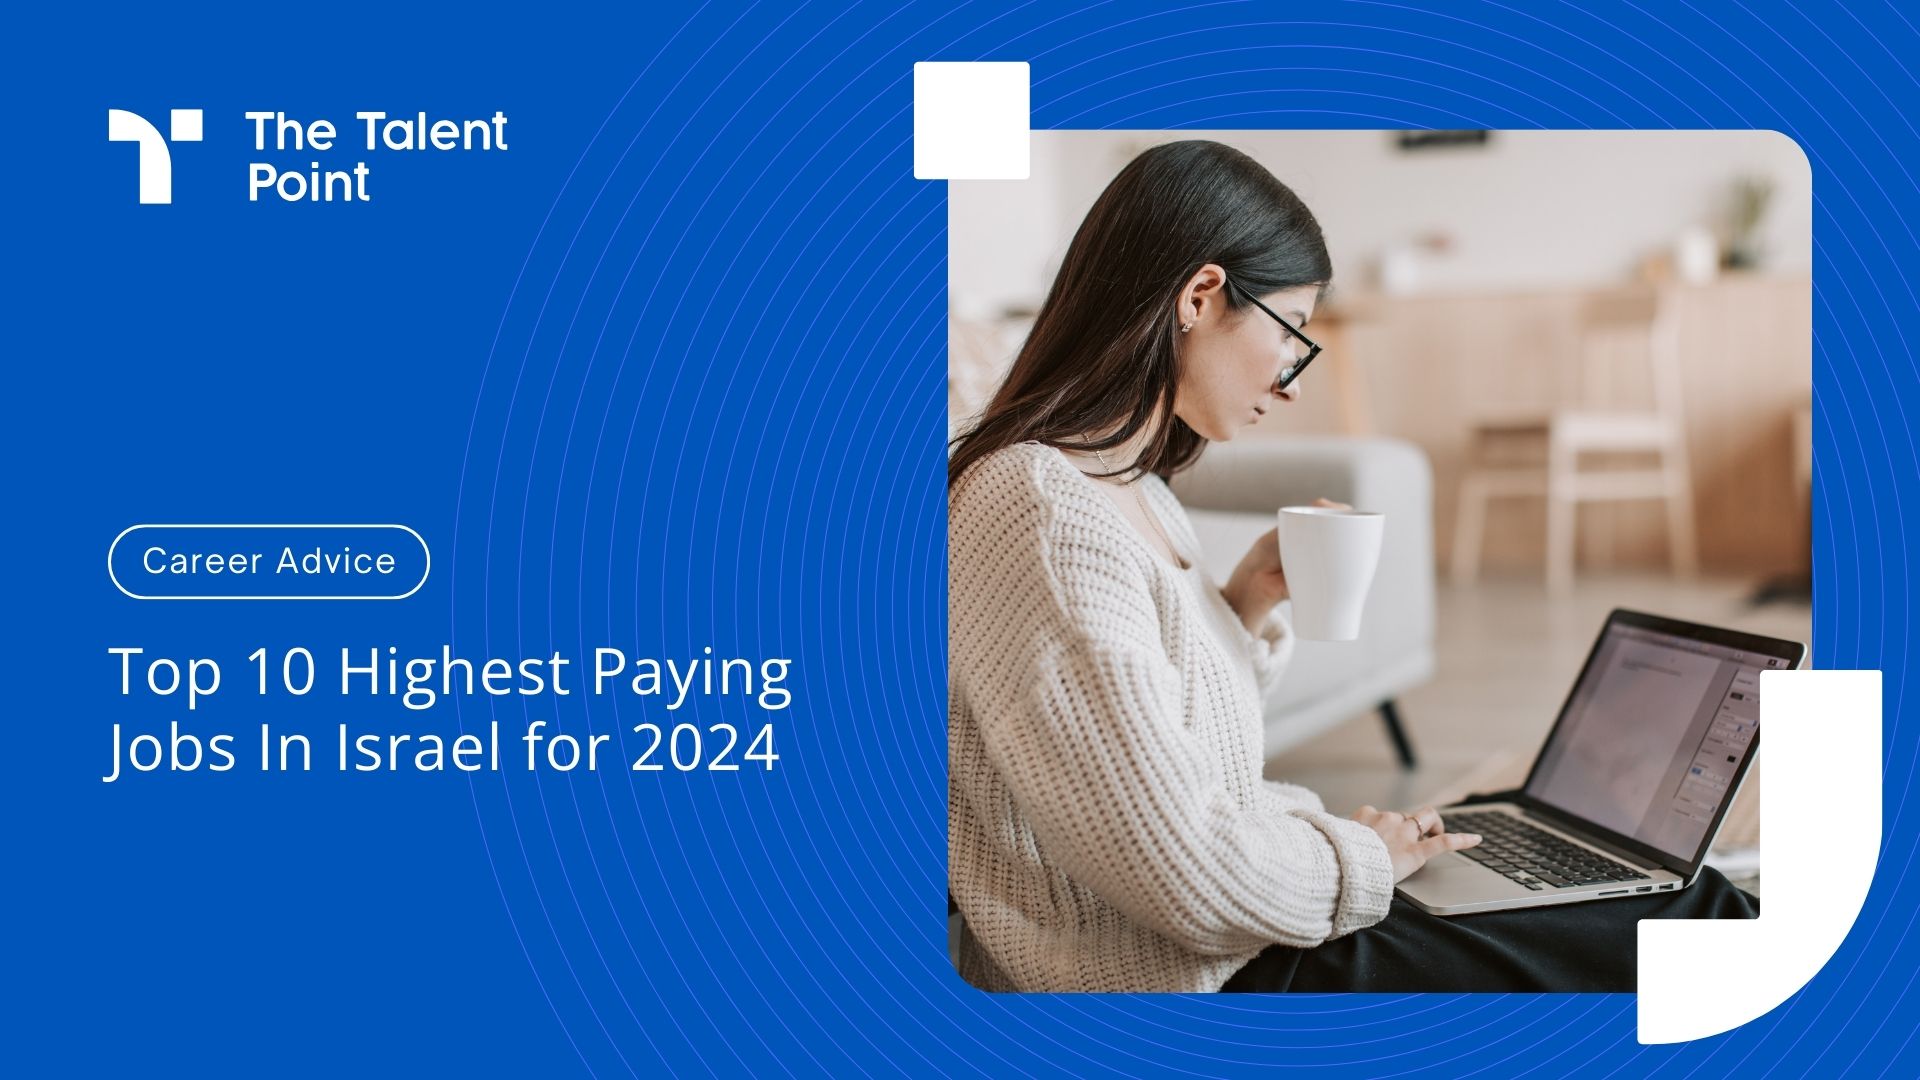 Top 10 Highest Paying Jobs In Israel for 2024